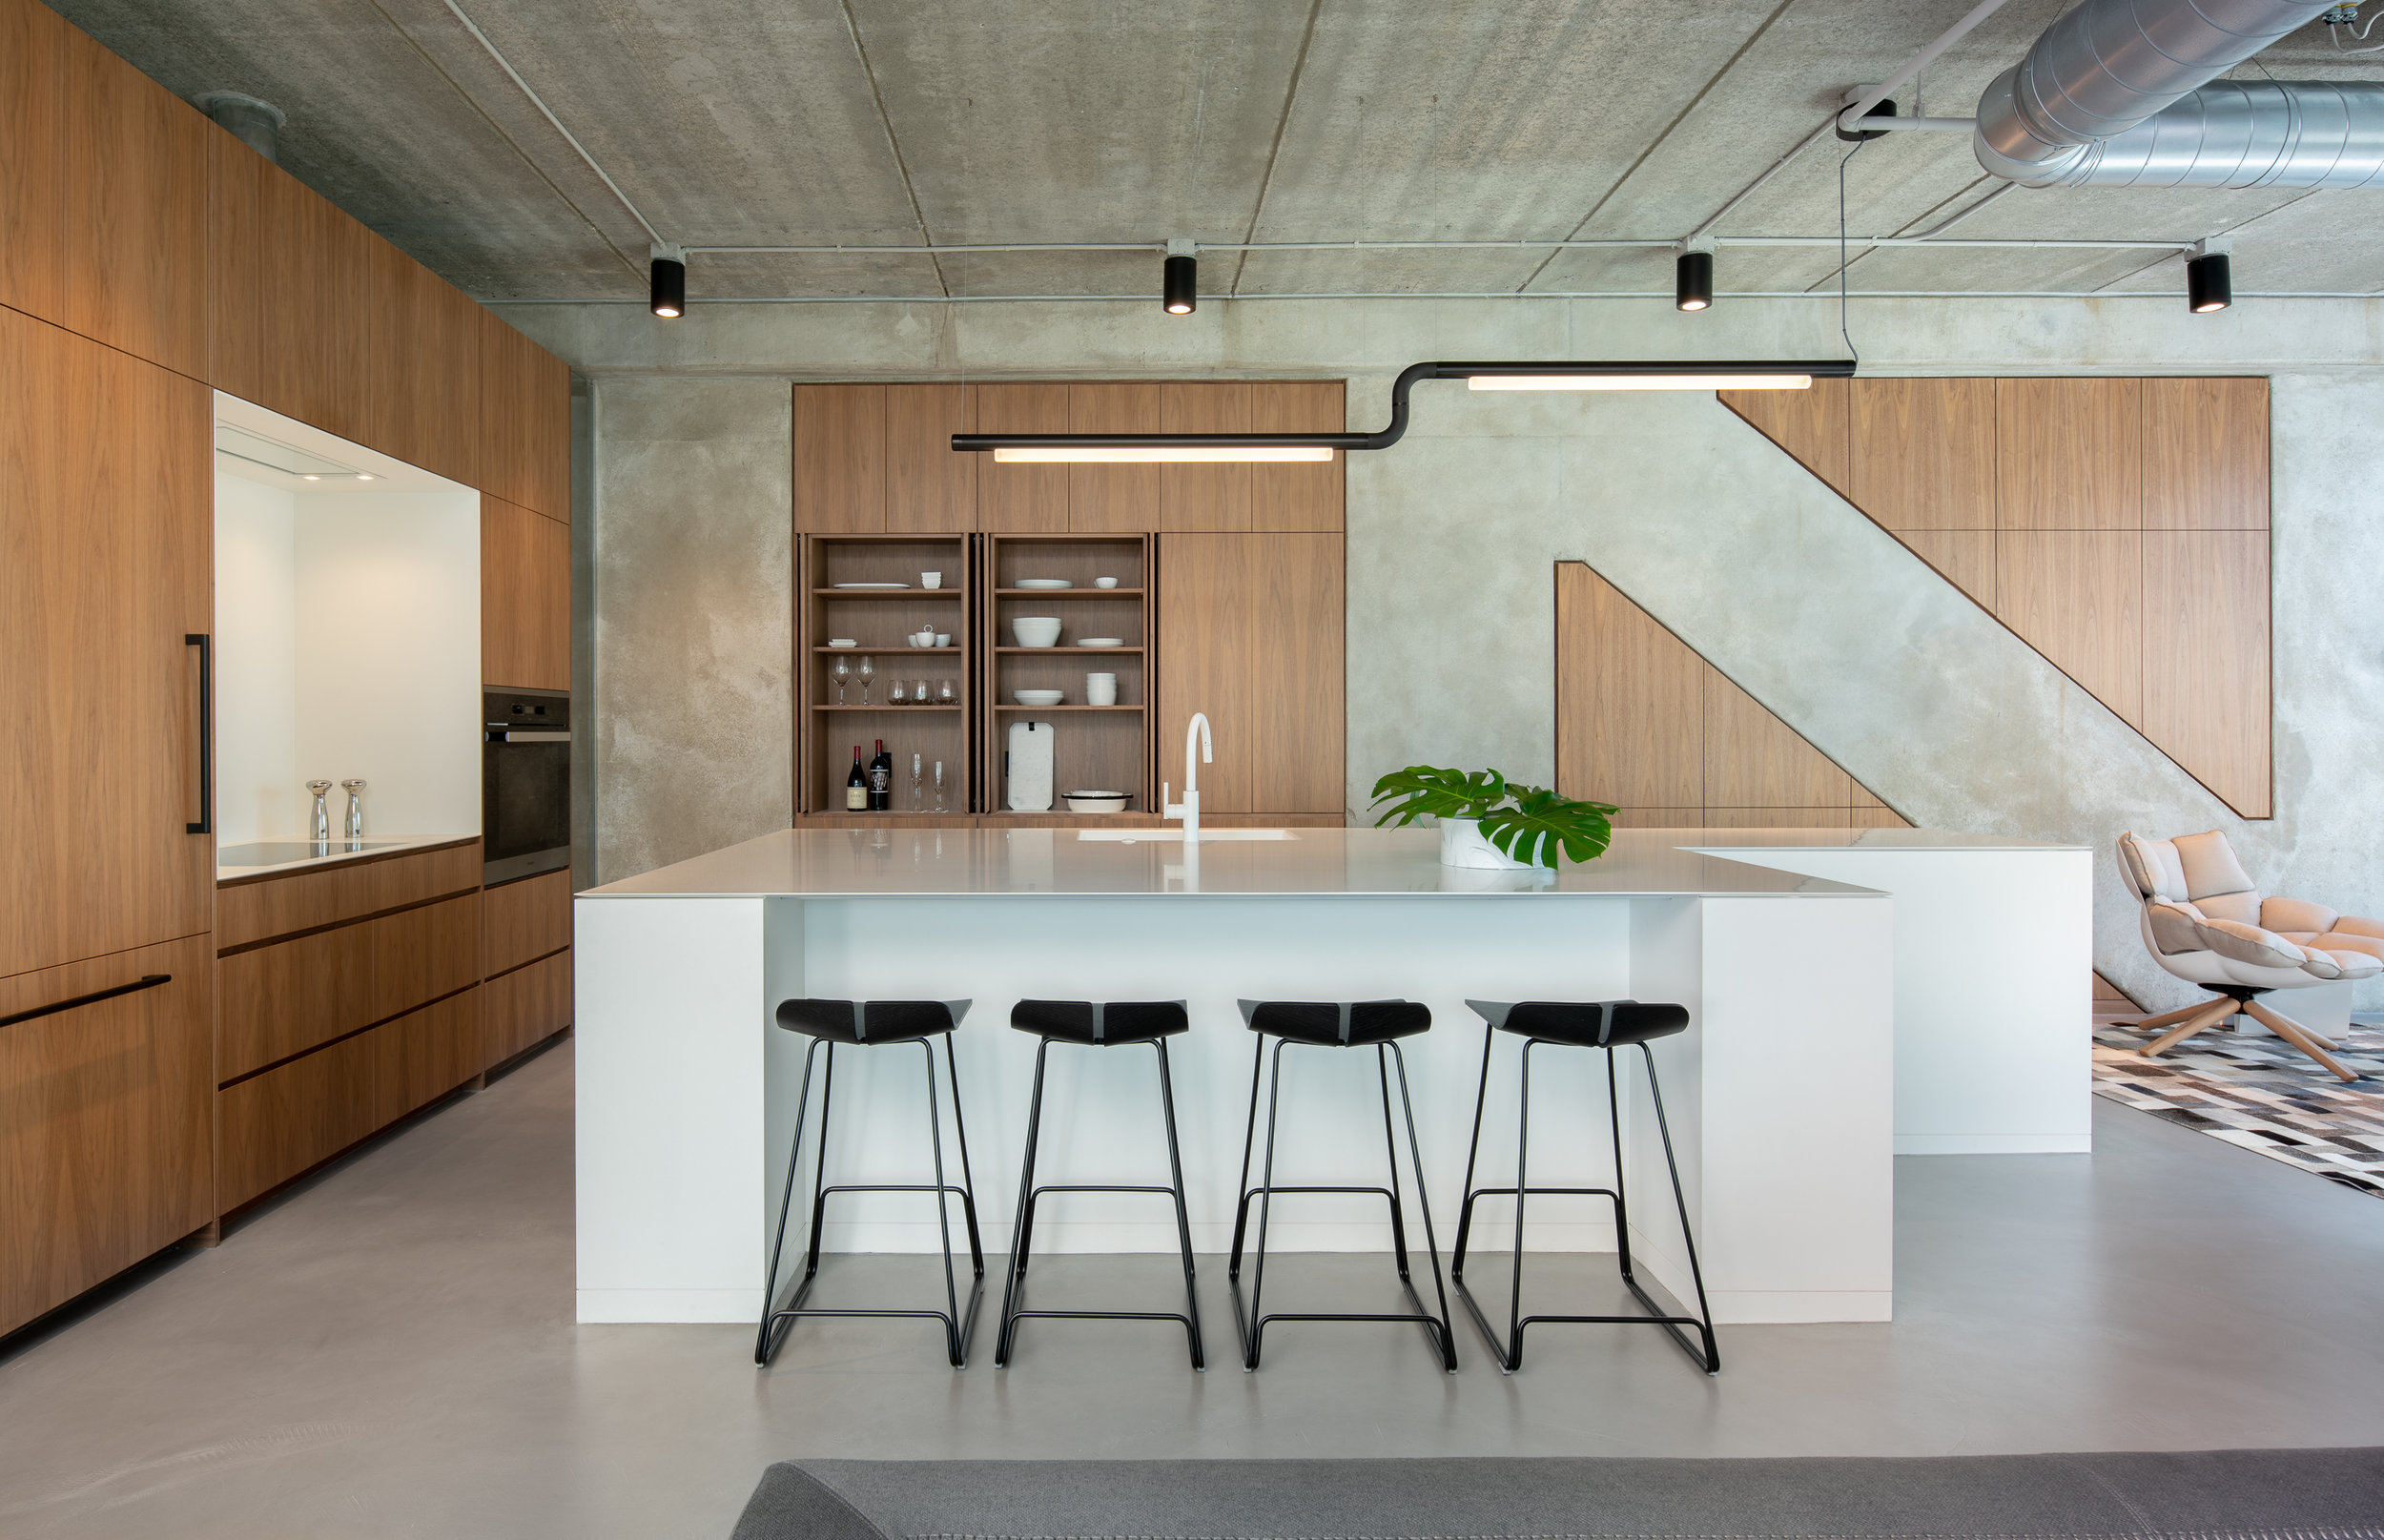 Modern kitchen renovation with custom fitted cabinetry designed by Christian Dean Architecture